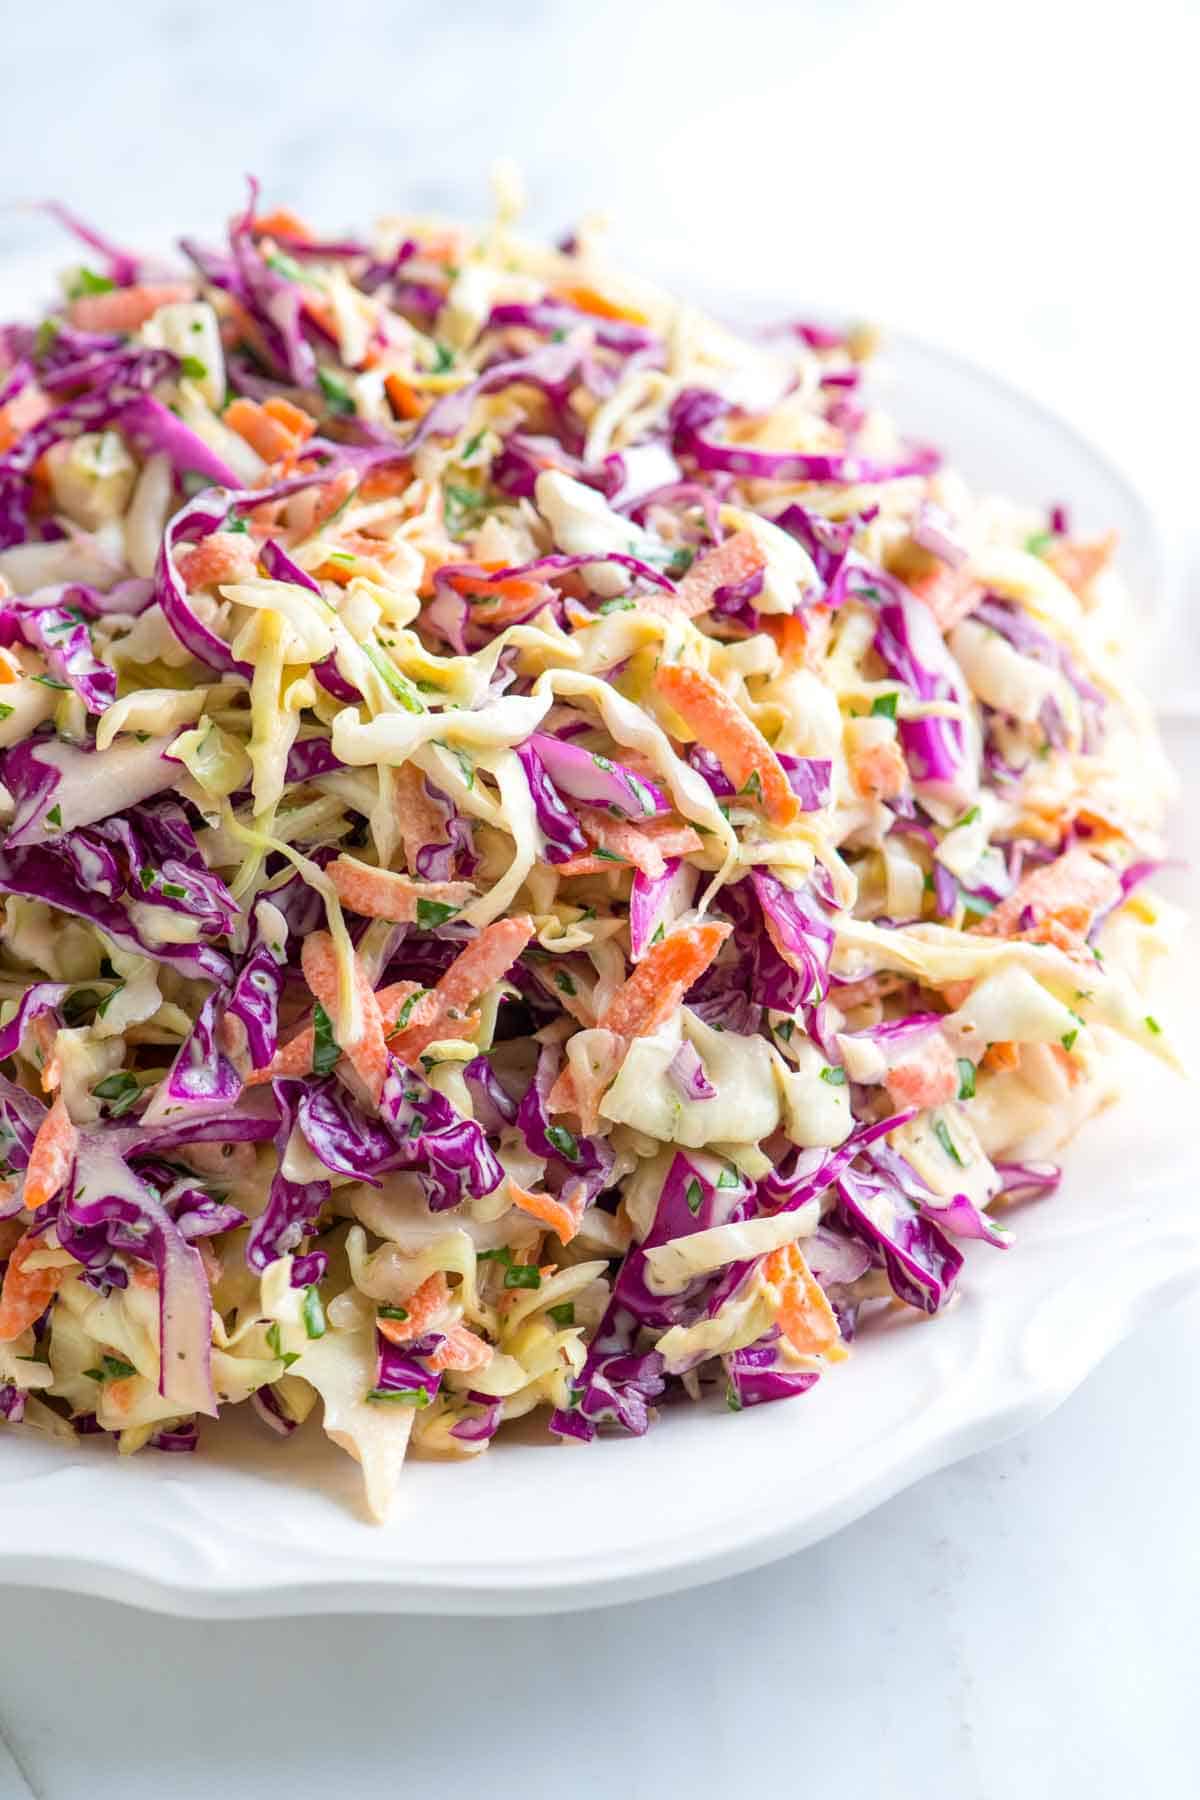 Homemade coleslaw with red and green cabbage